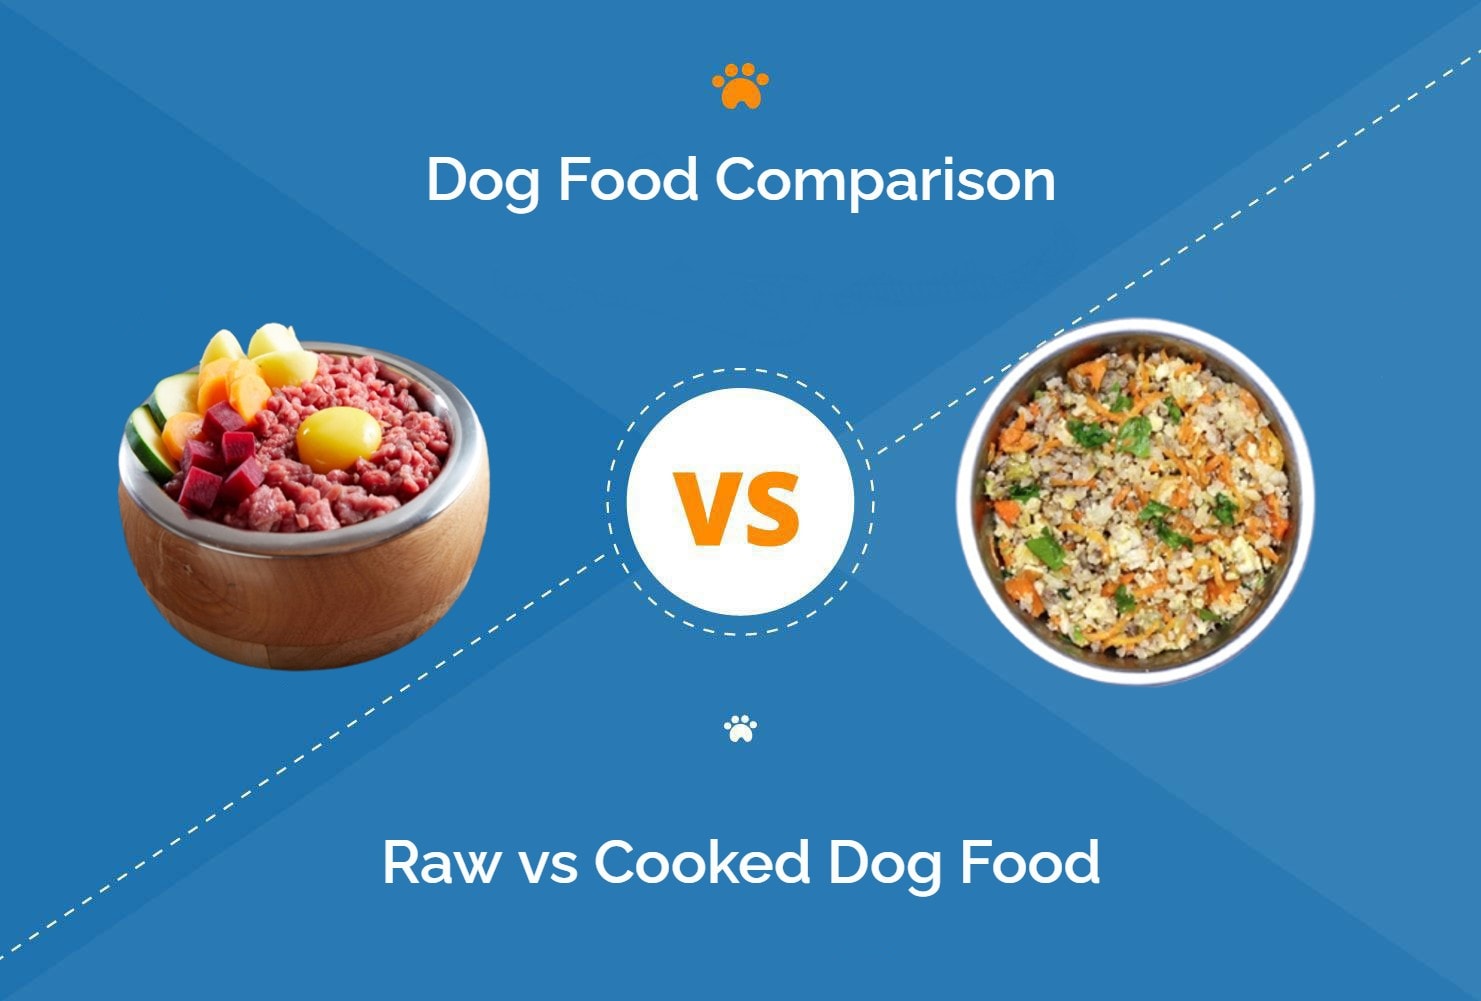 Raw vs Cooked dog food